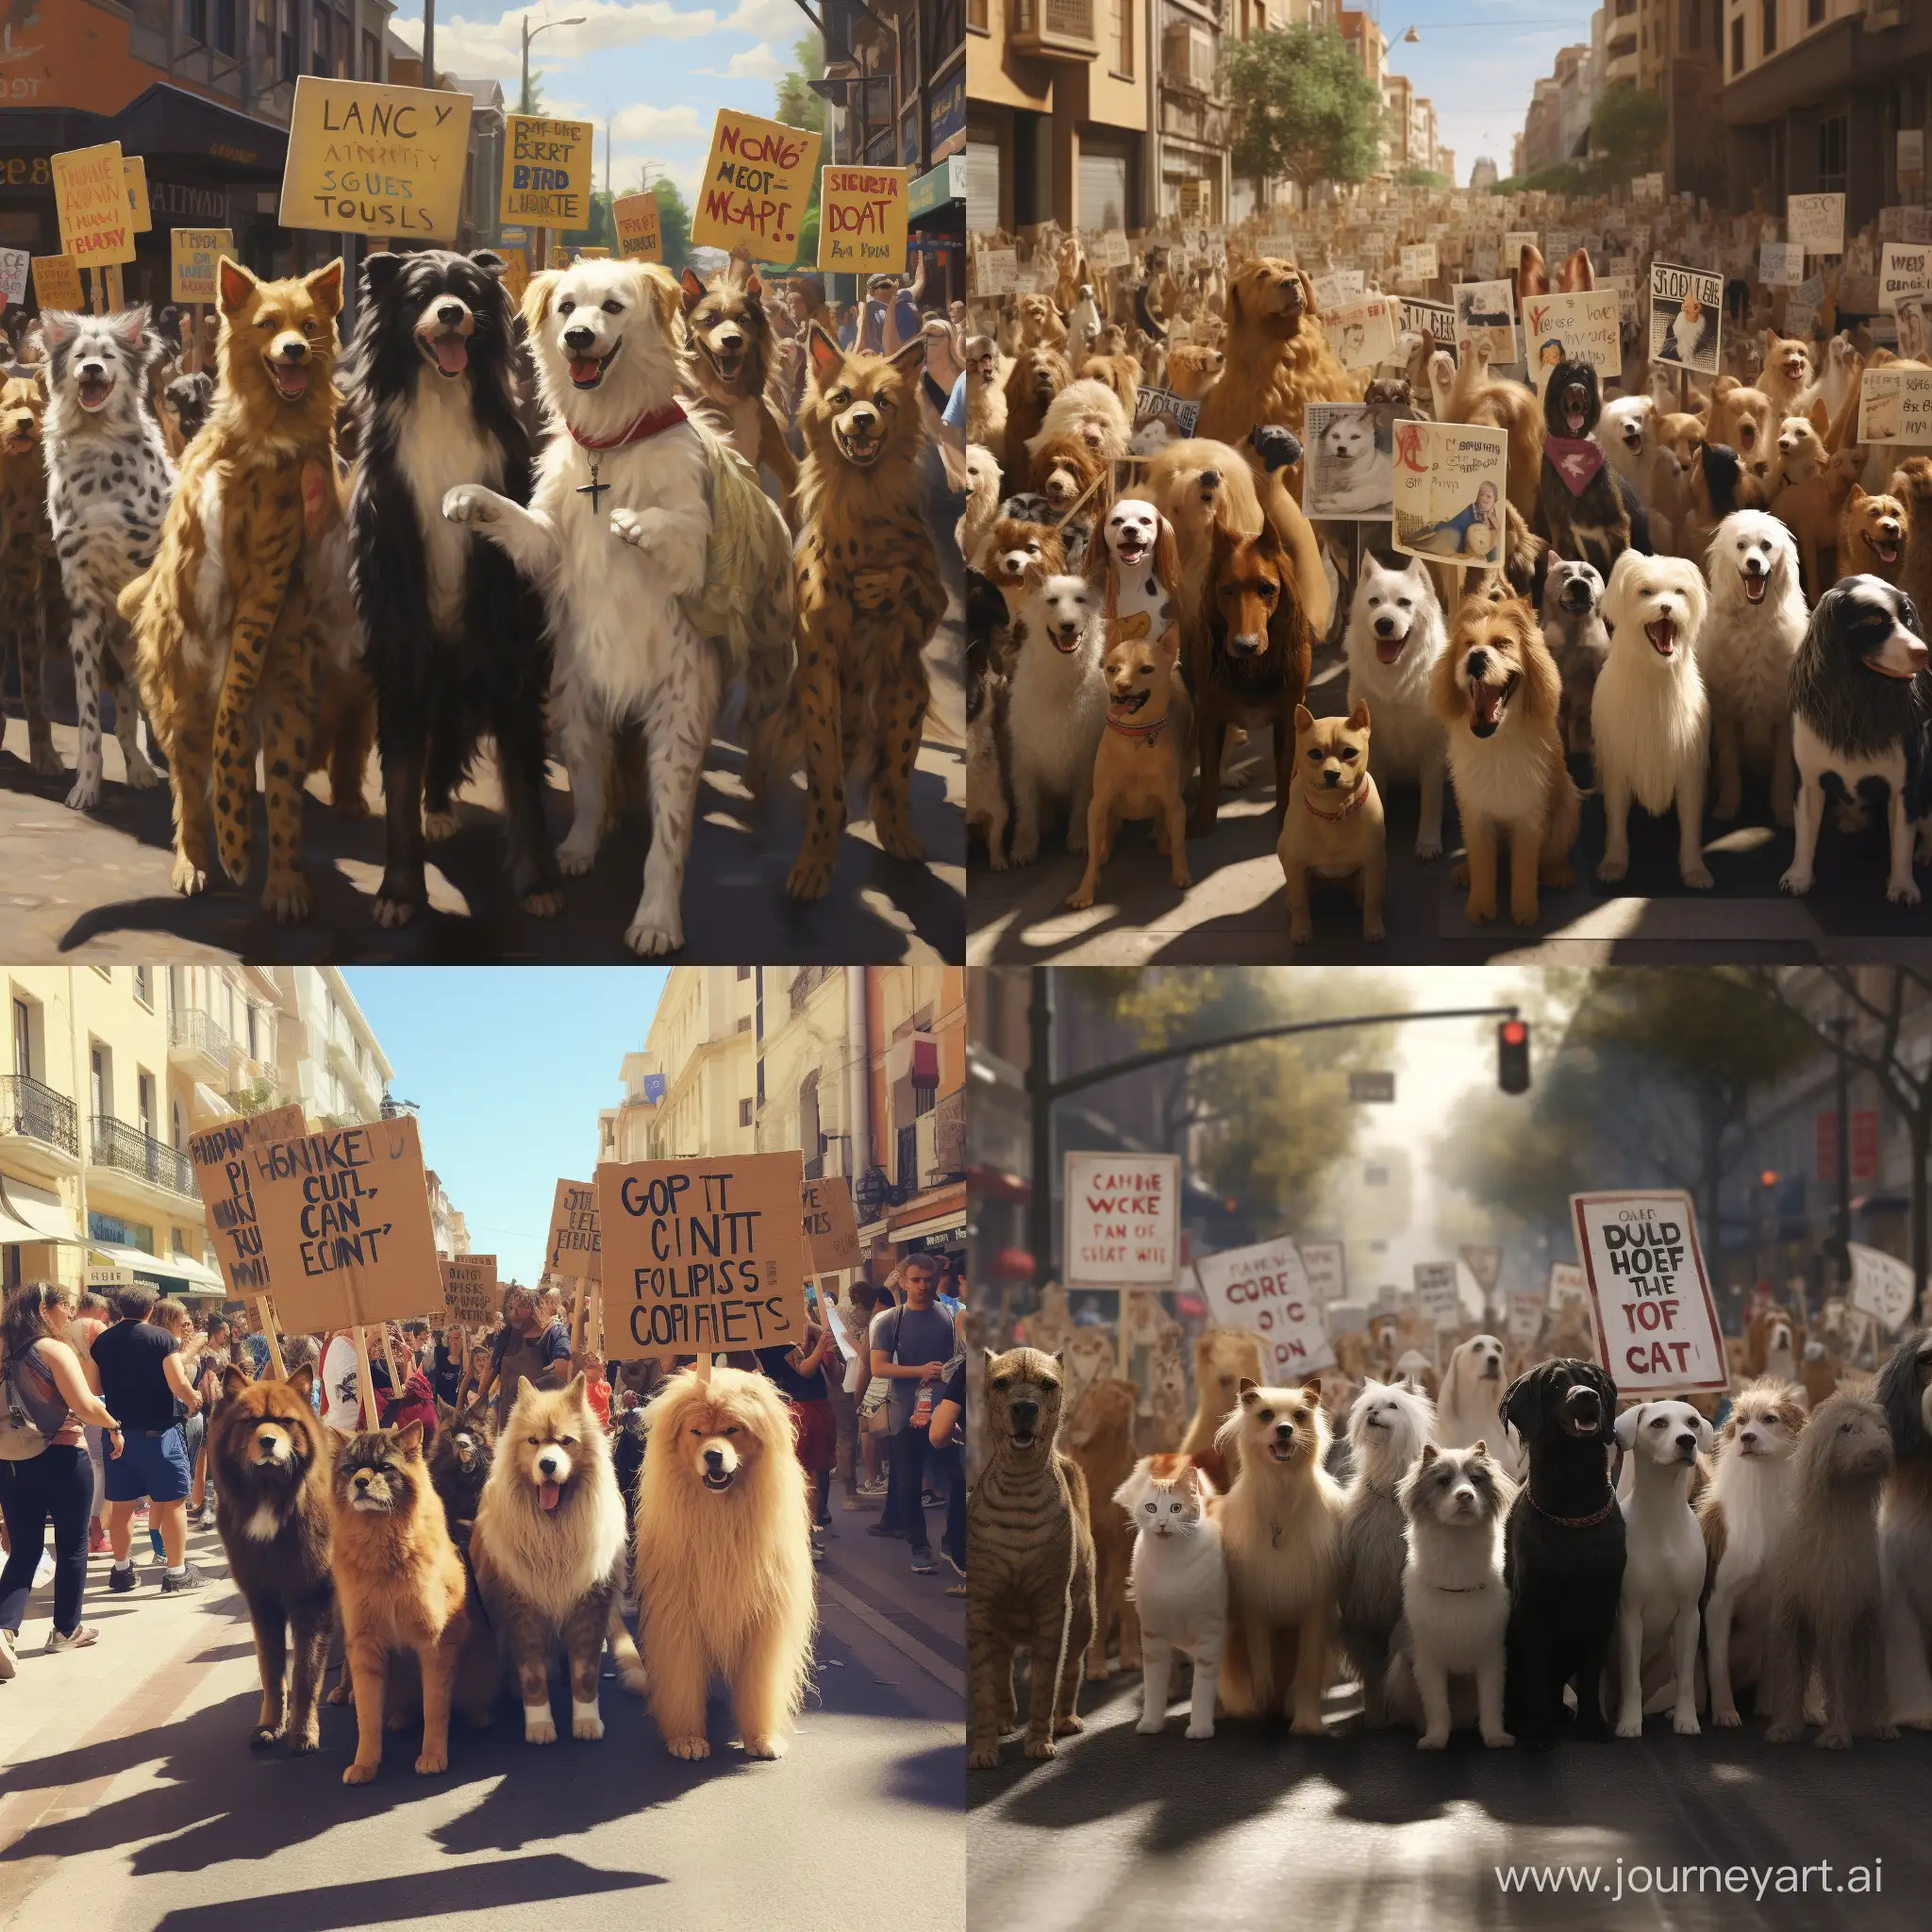 Photorealistic protestors walking street with signs saying “Dogs are not Cats!”